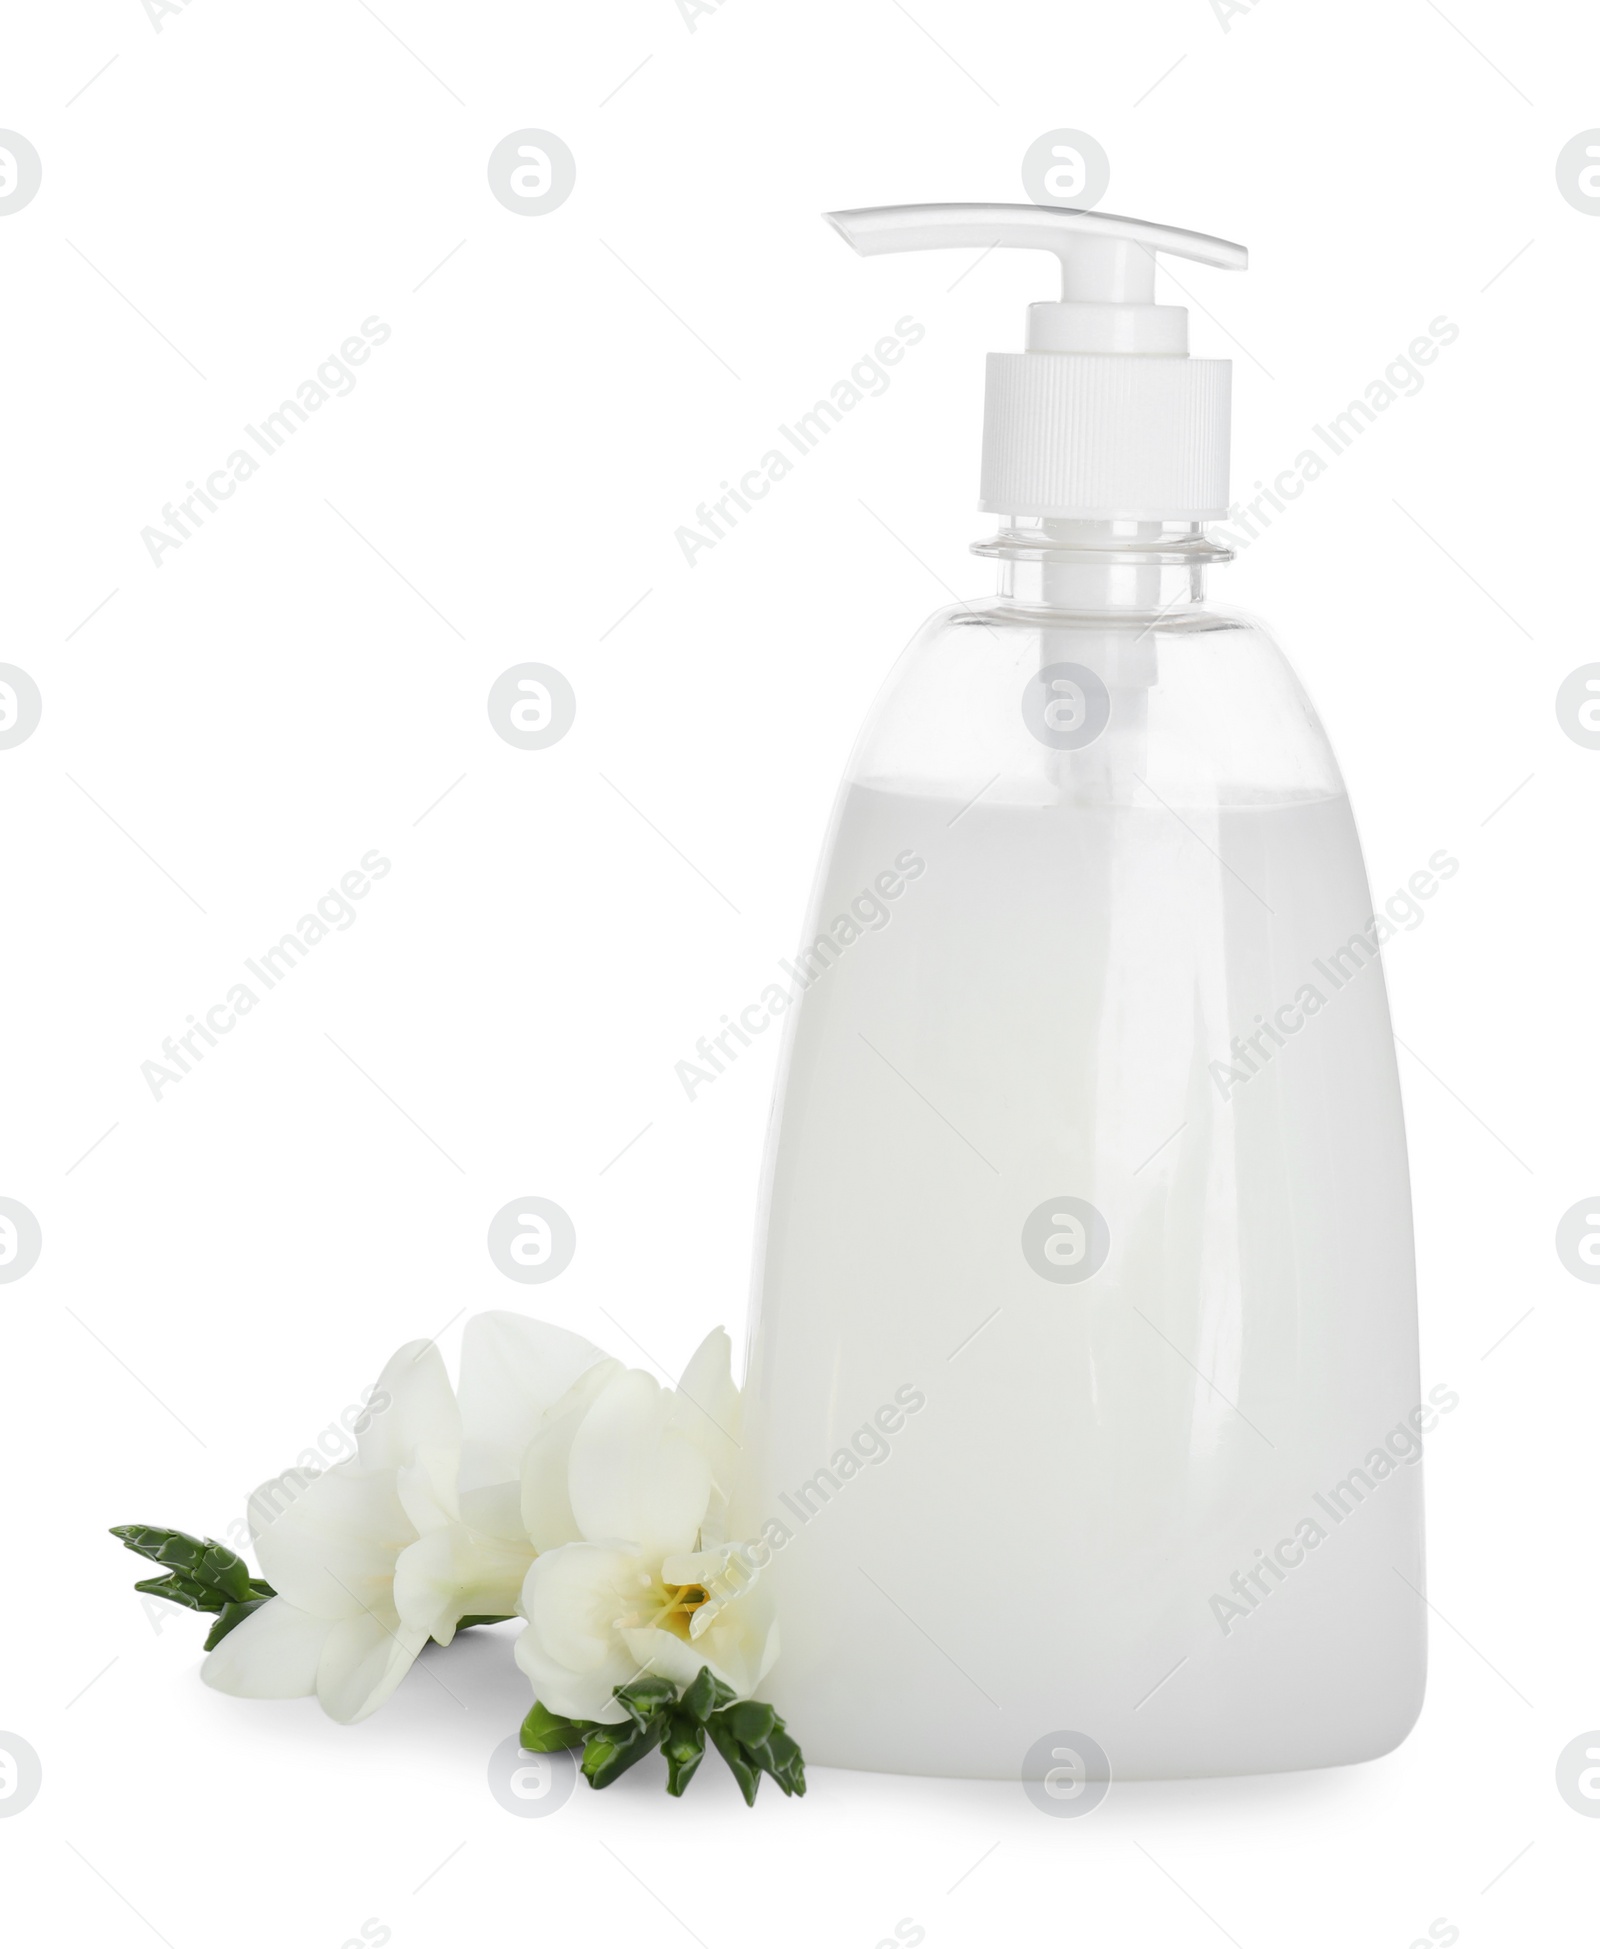 Photo of Dispenser with liquid soap and freesia flowers on white background